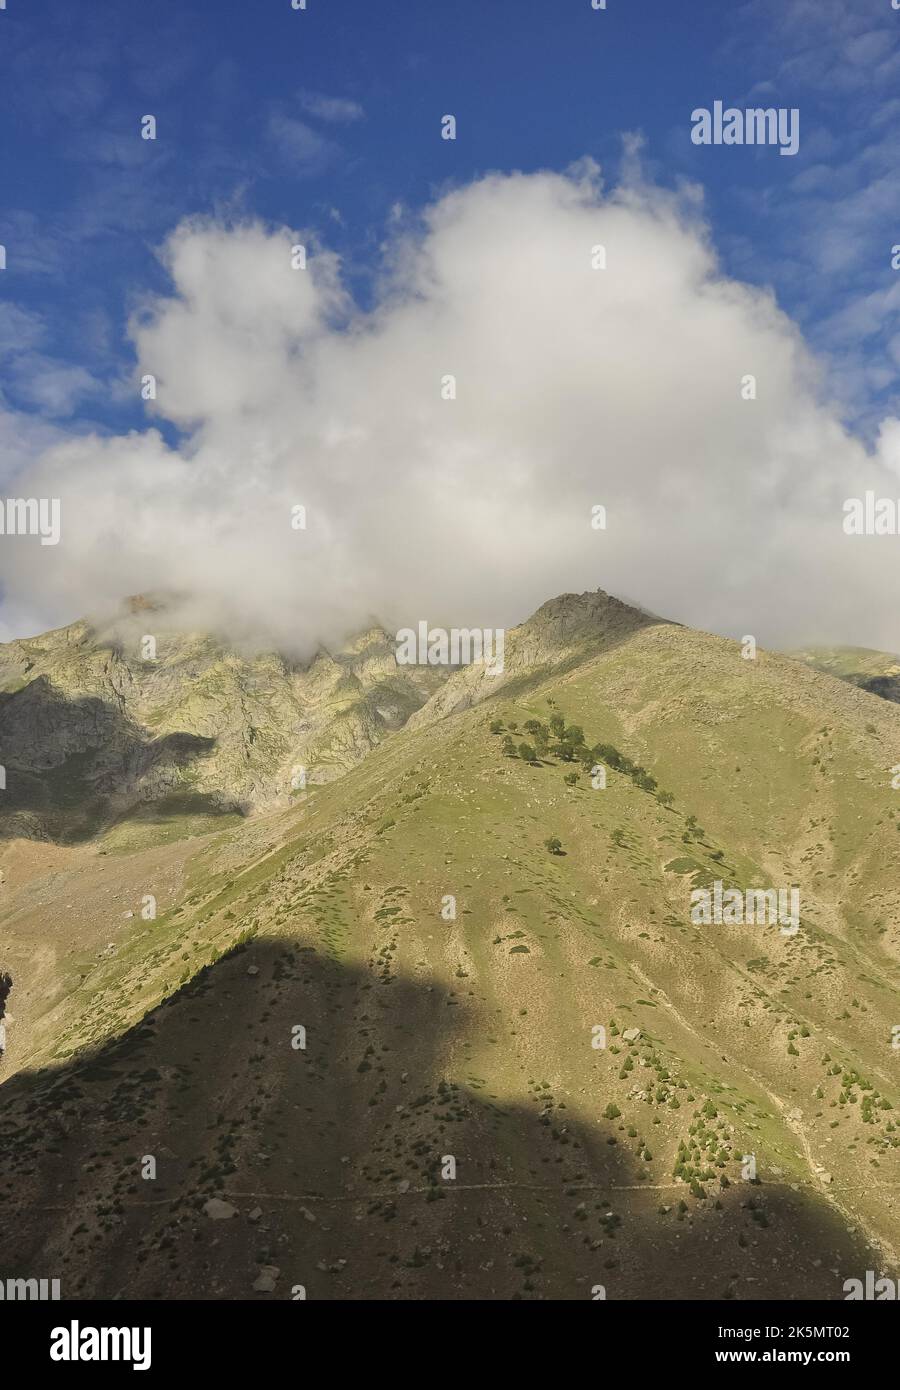 Morning view of dry mountain covered from the peak with clouds in Darcha, Lahaul and Spiti, Himachal Pradesh, India Stock Photo